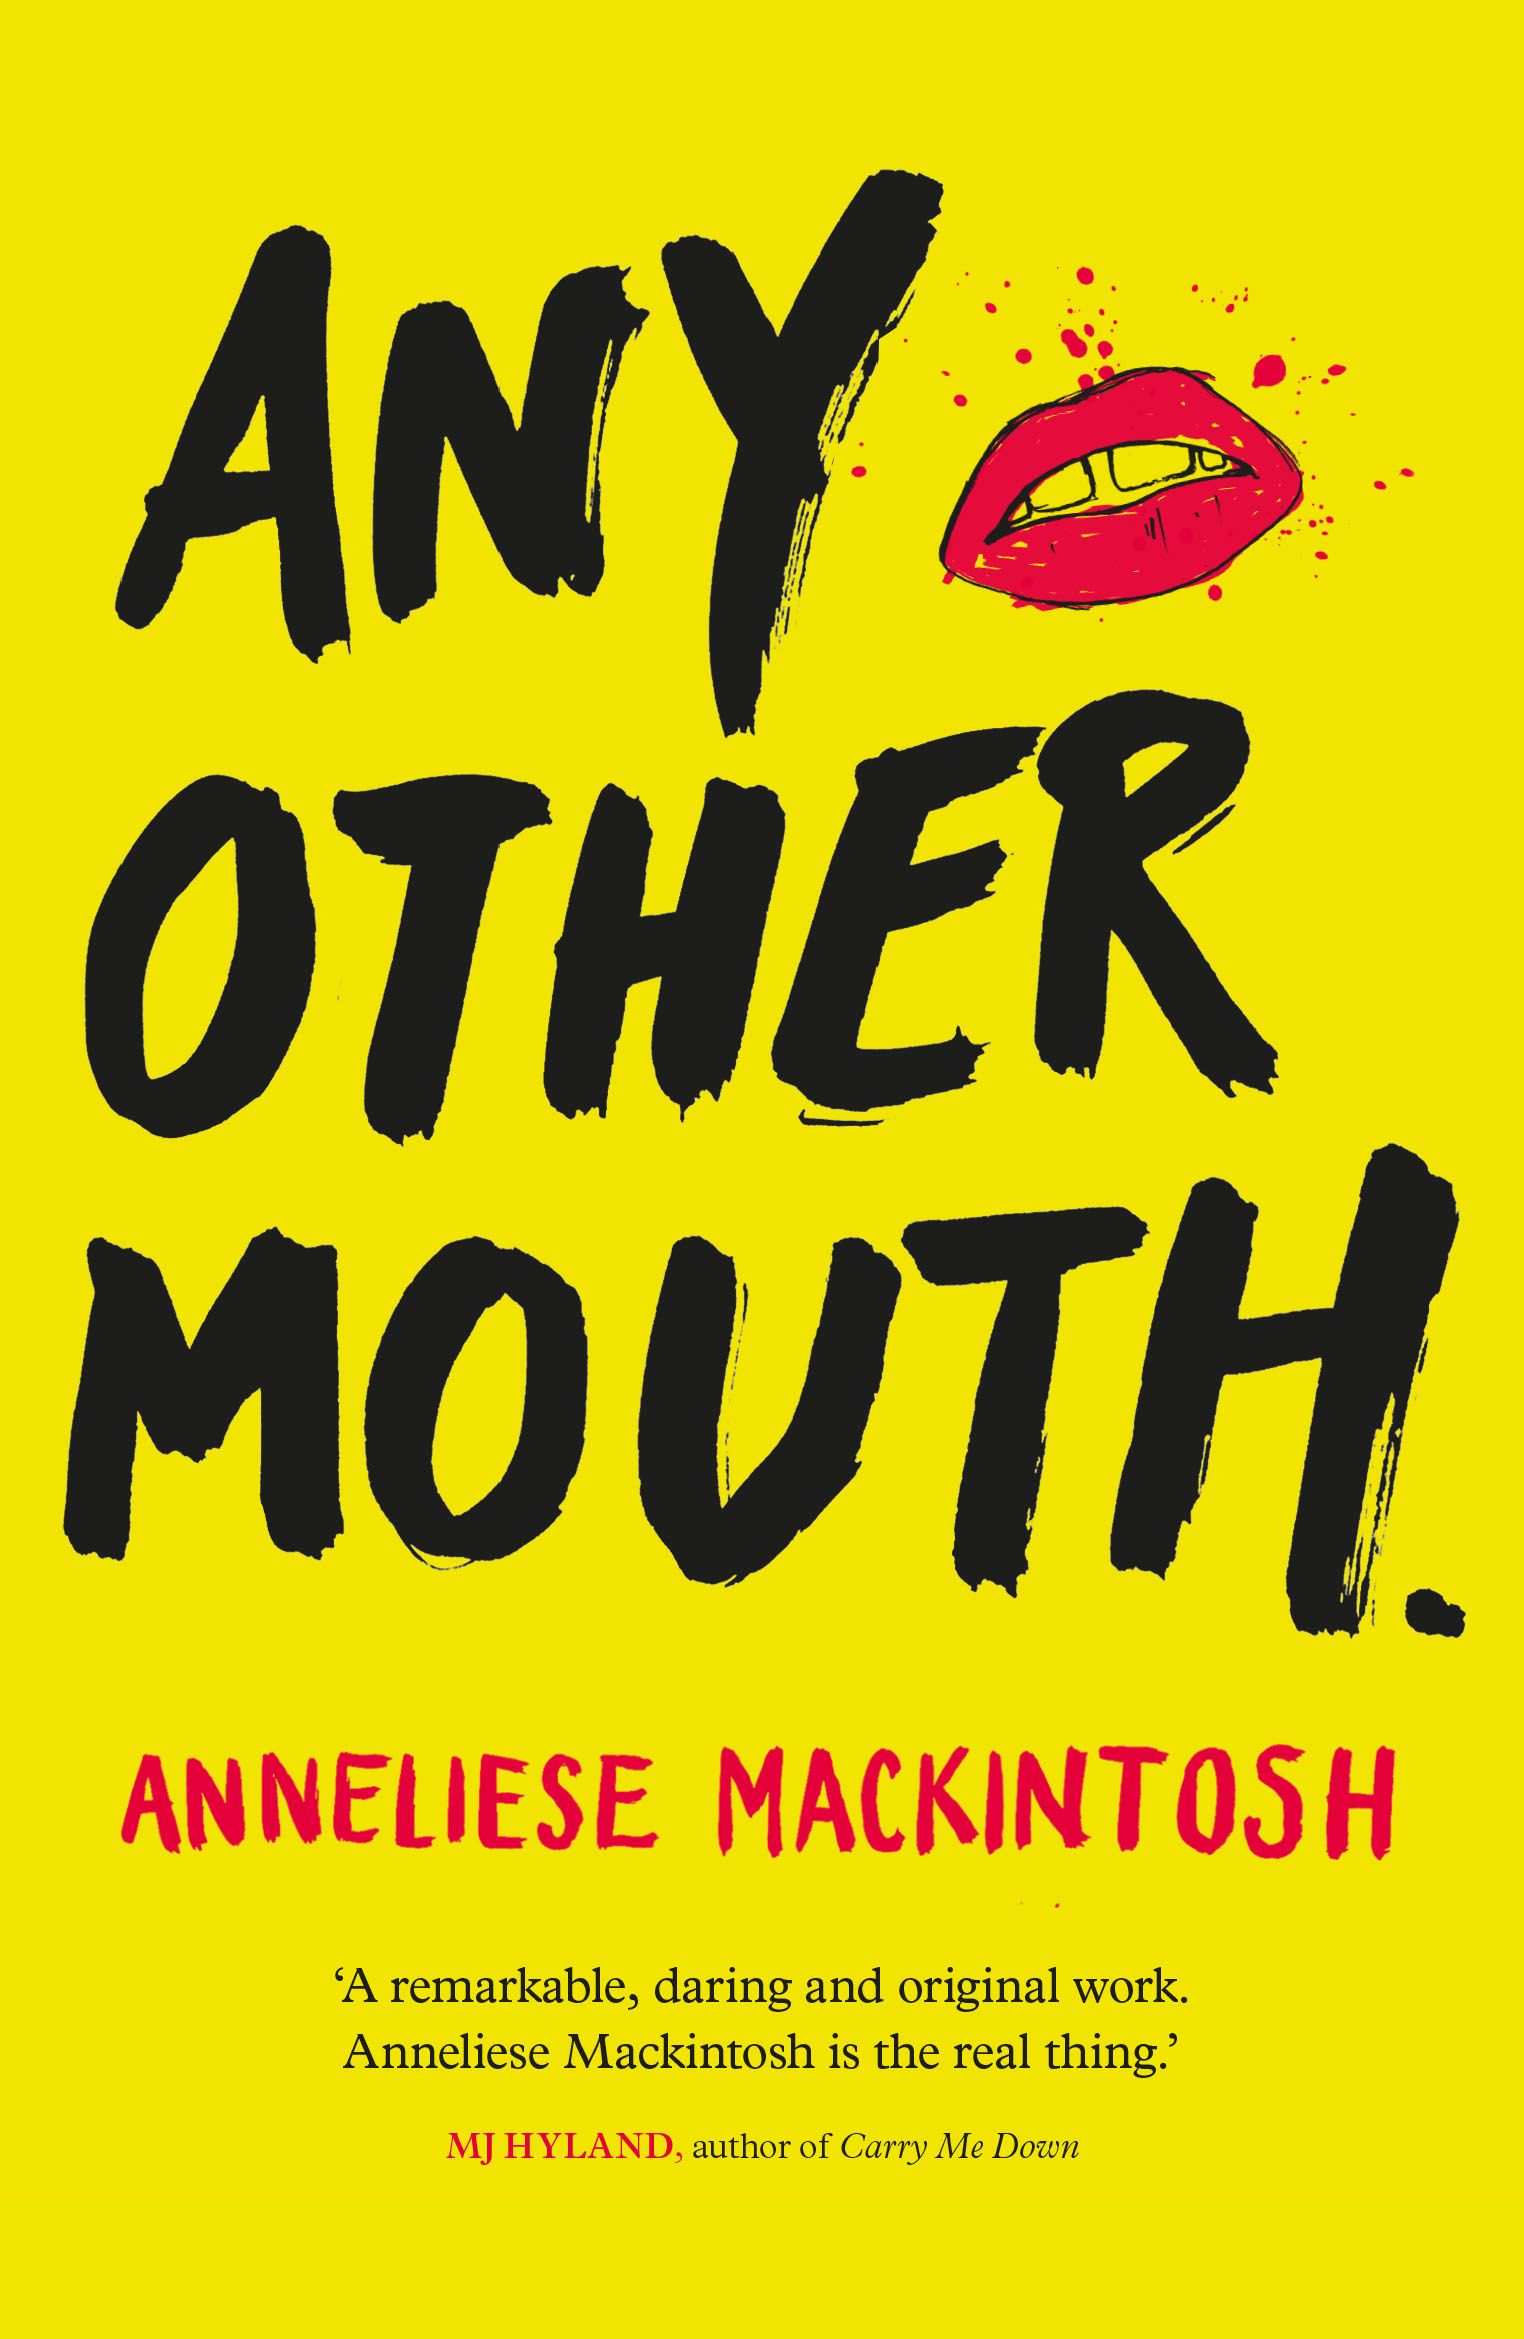 A BOX TO CLIMB OUT OF: Anneliese Mackintosh’s Any Other Mouth